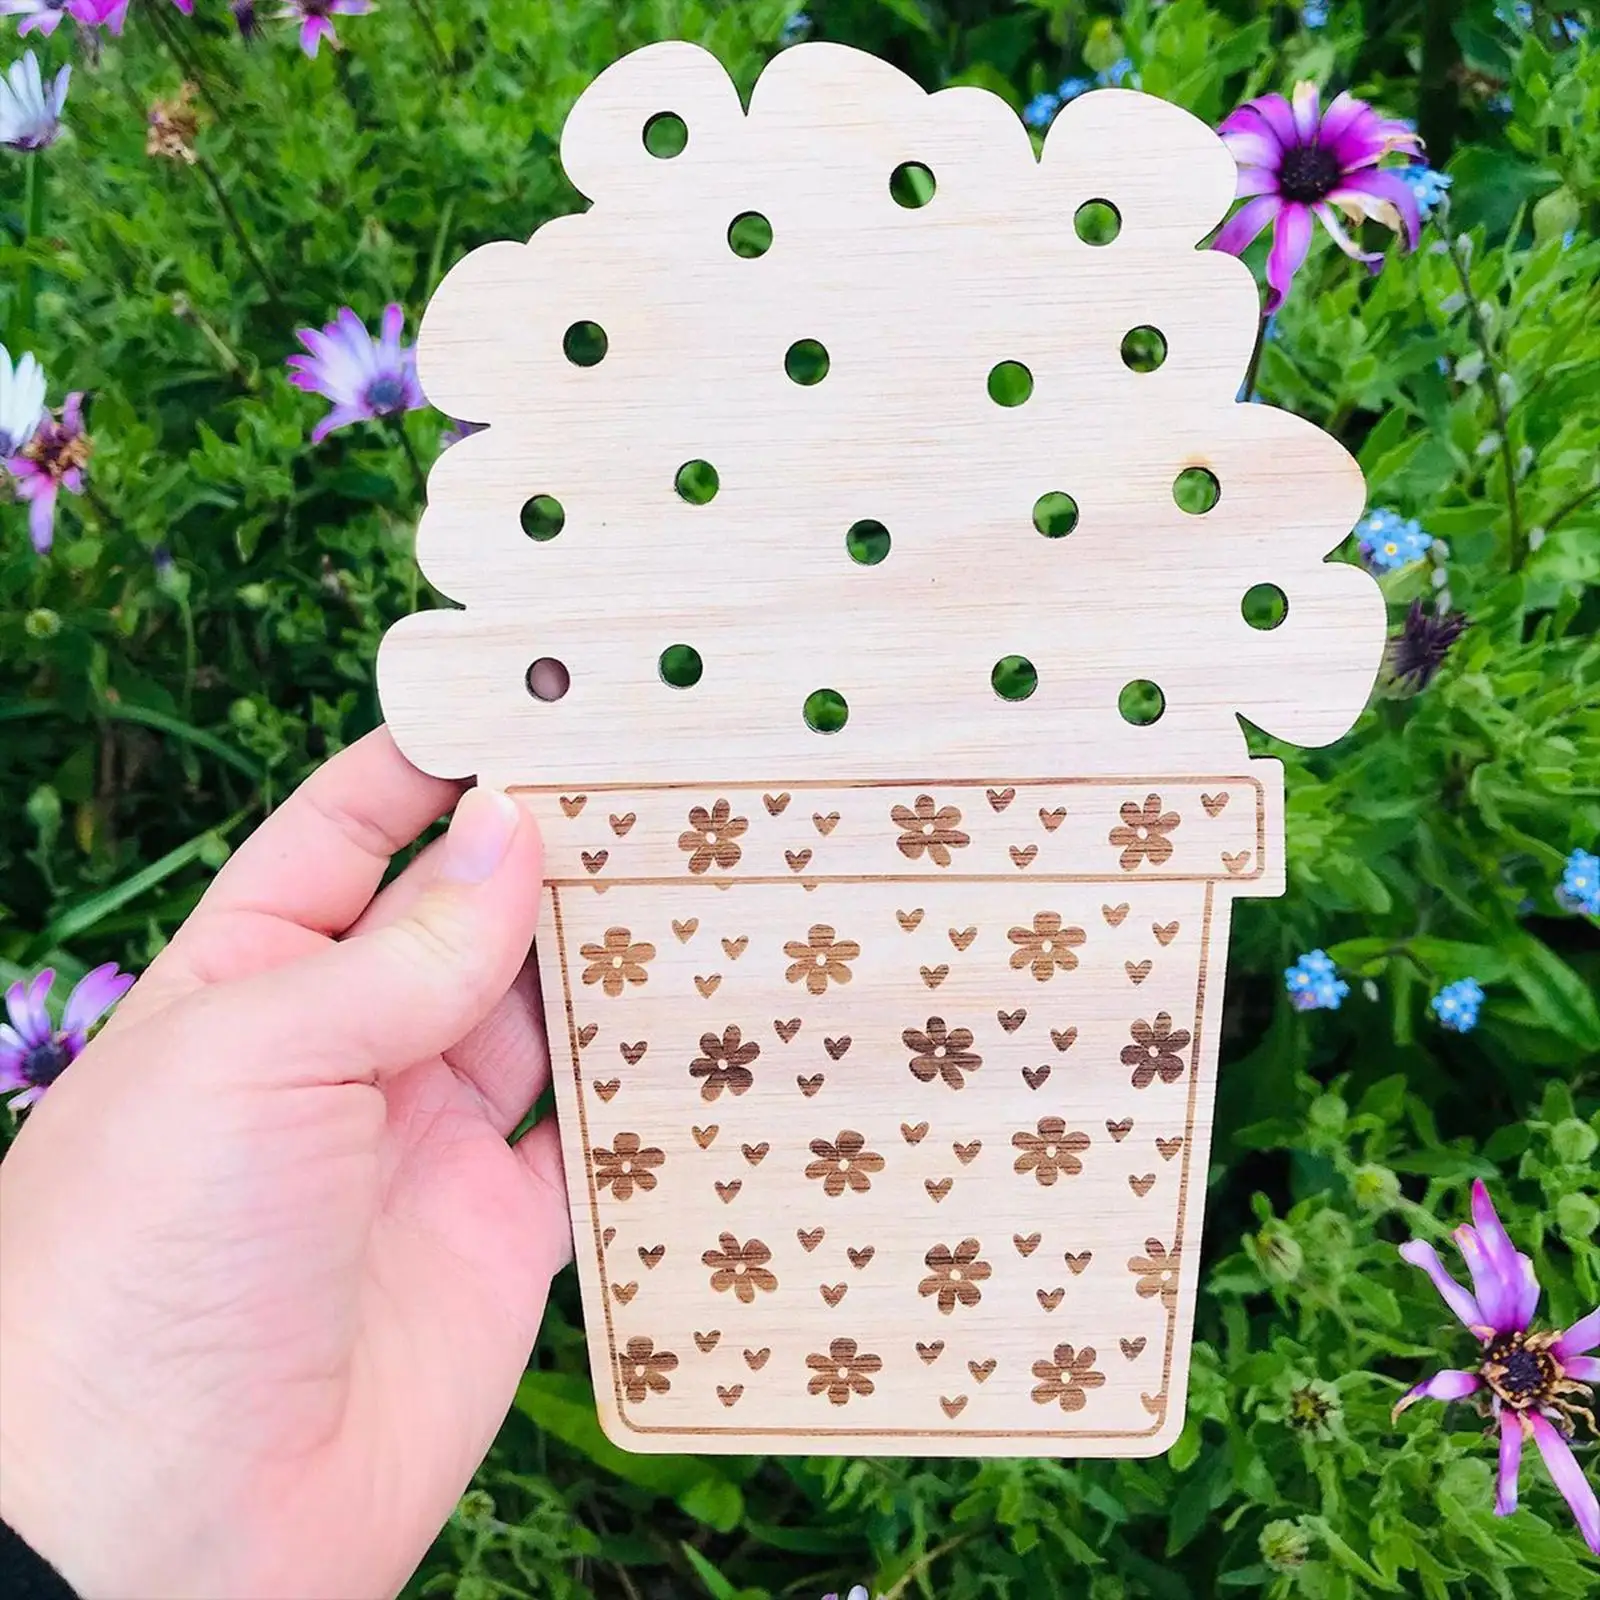 Hand Picked Flower Holder Board Filler Home Decoration Outdoor Activities Reusable Creative Bouquet Crafts Kids Birthday Gifts